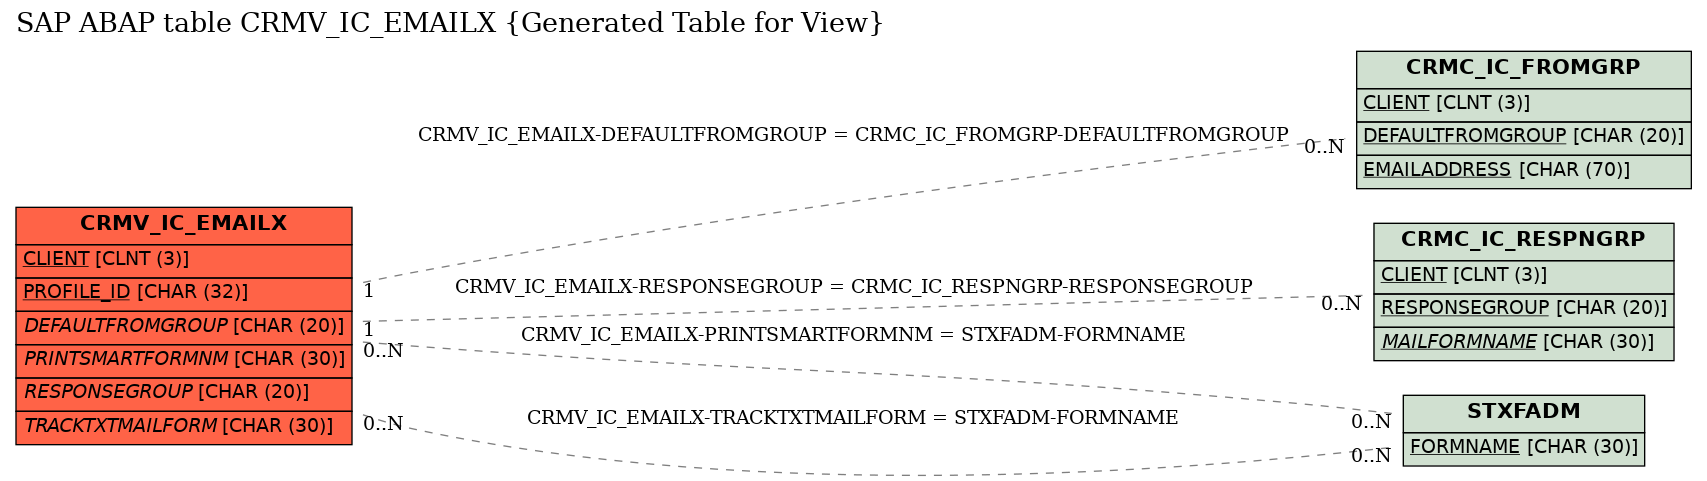 E-R Diagram for table CRMV_IC_EMAILX (Generated Table for View)